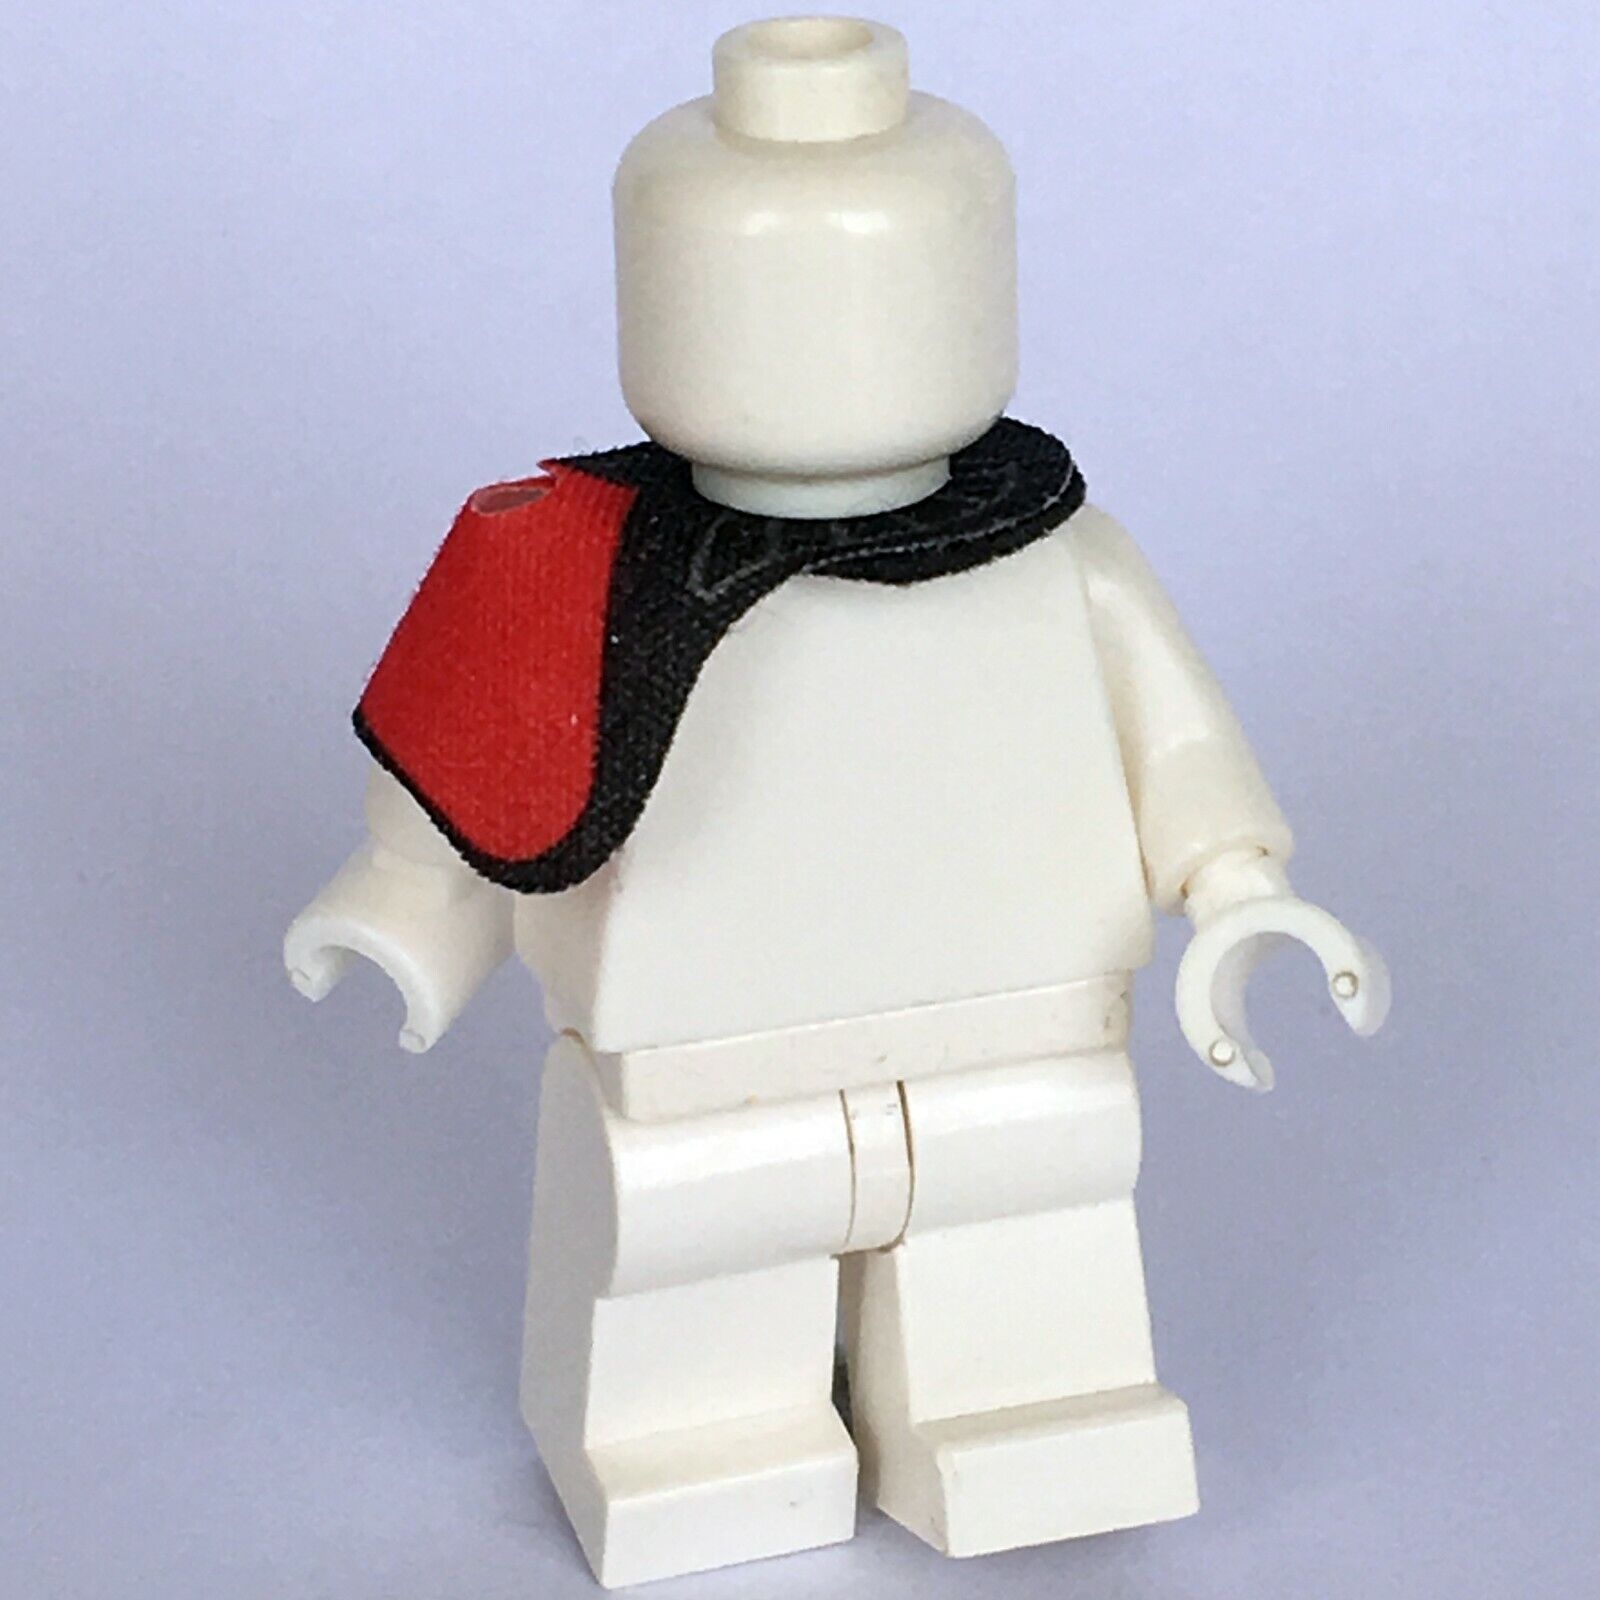 Star Wars LEGO First Order Officer Pauldron Cloth for Minifigures 75100 75104